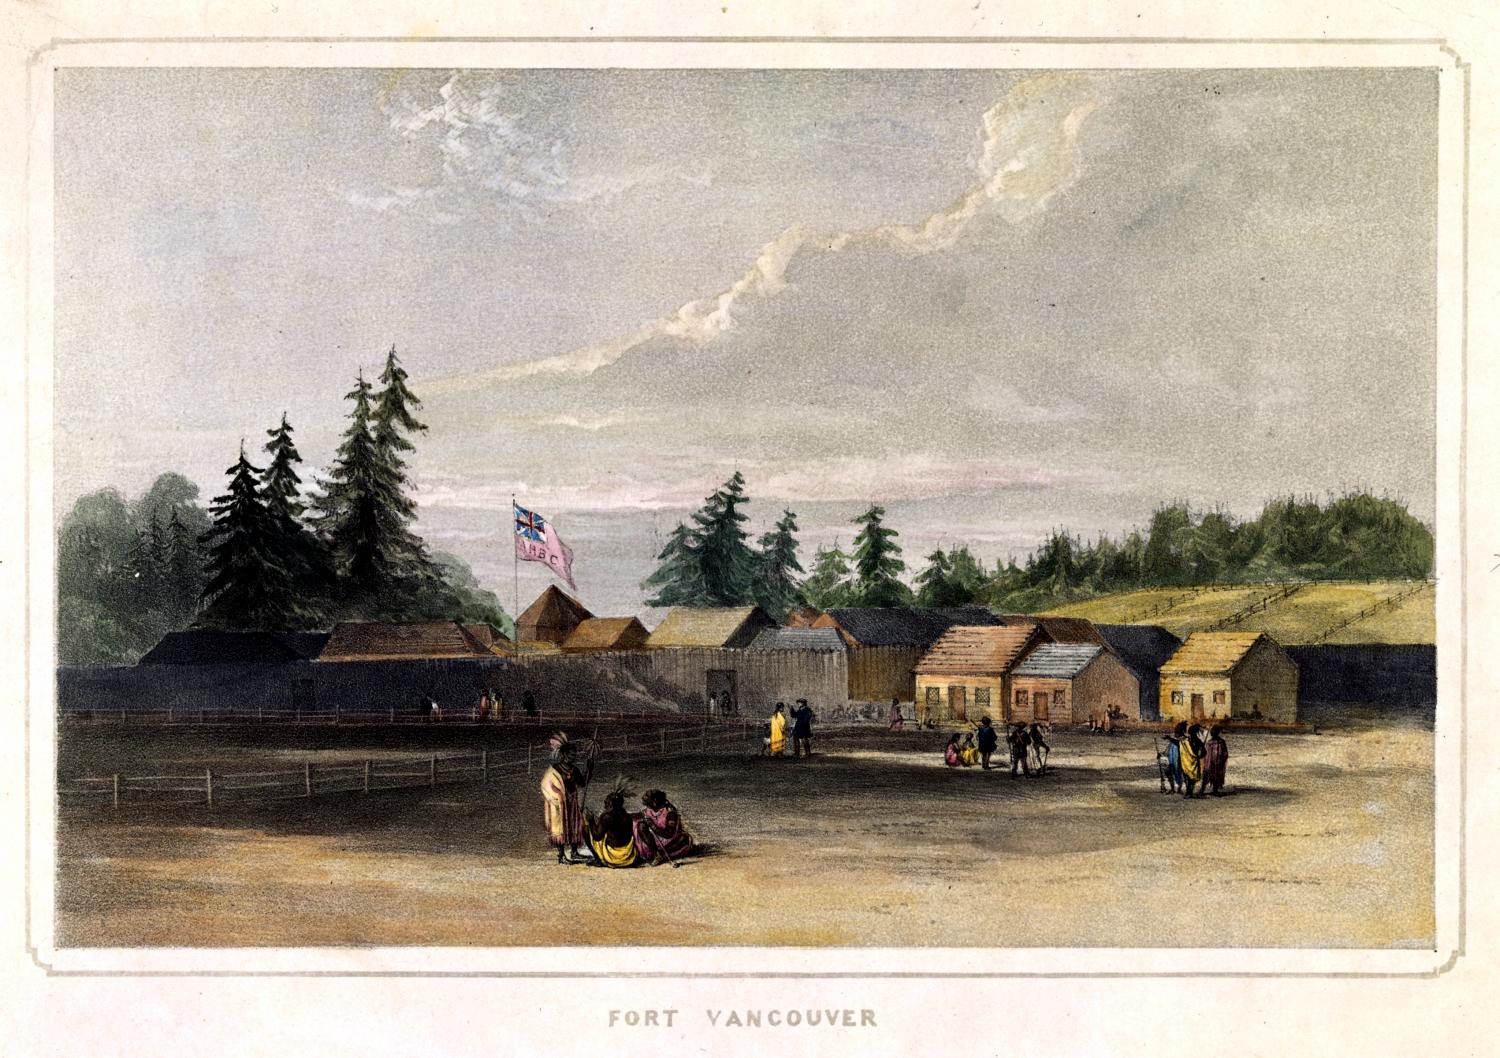 Fort Vancouver with Indigenous people in FG